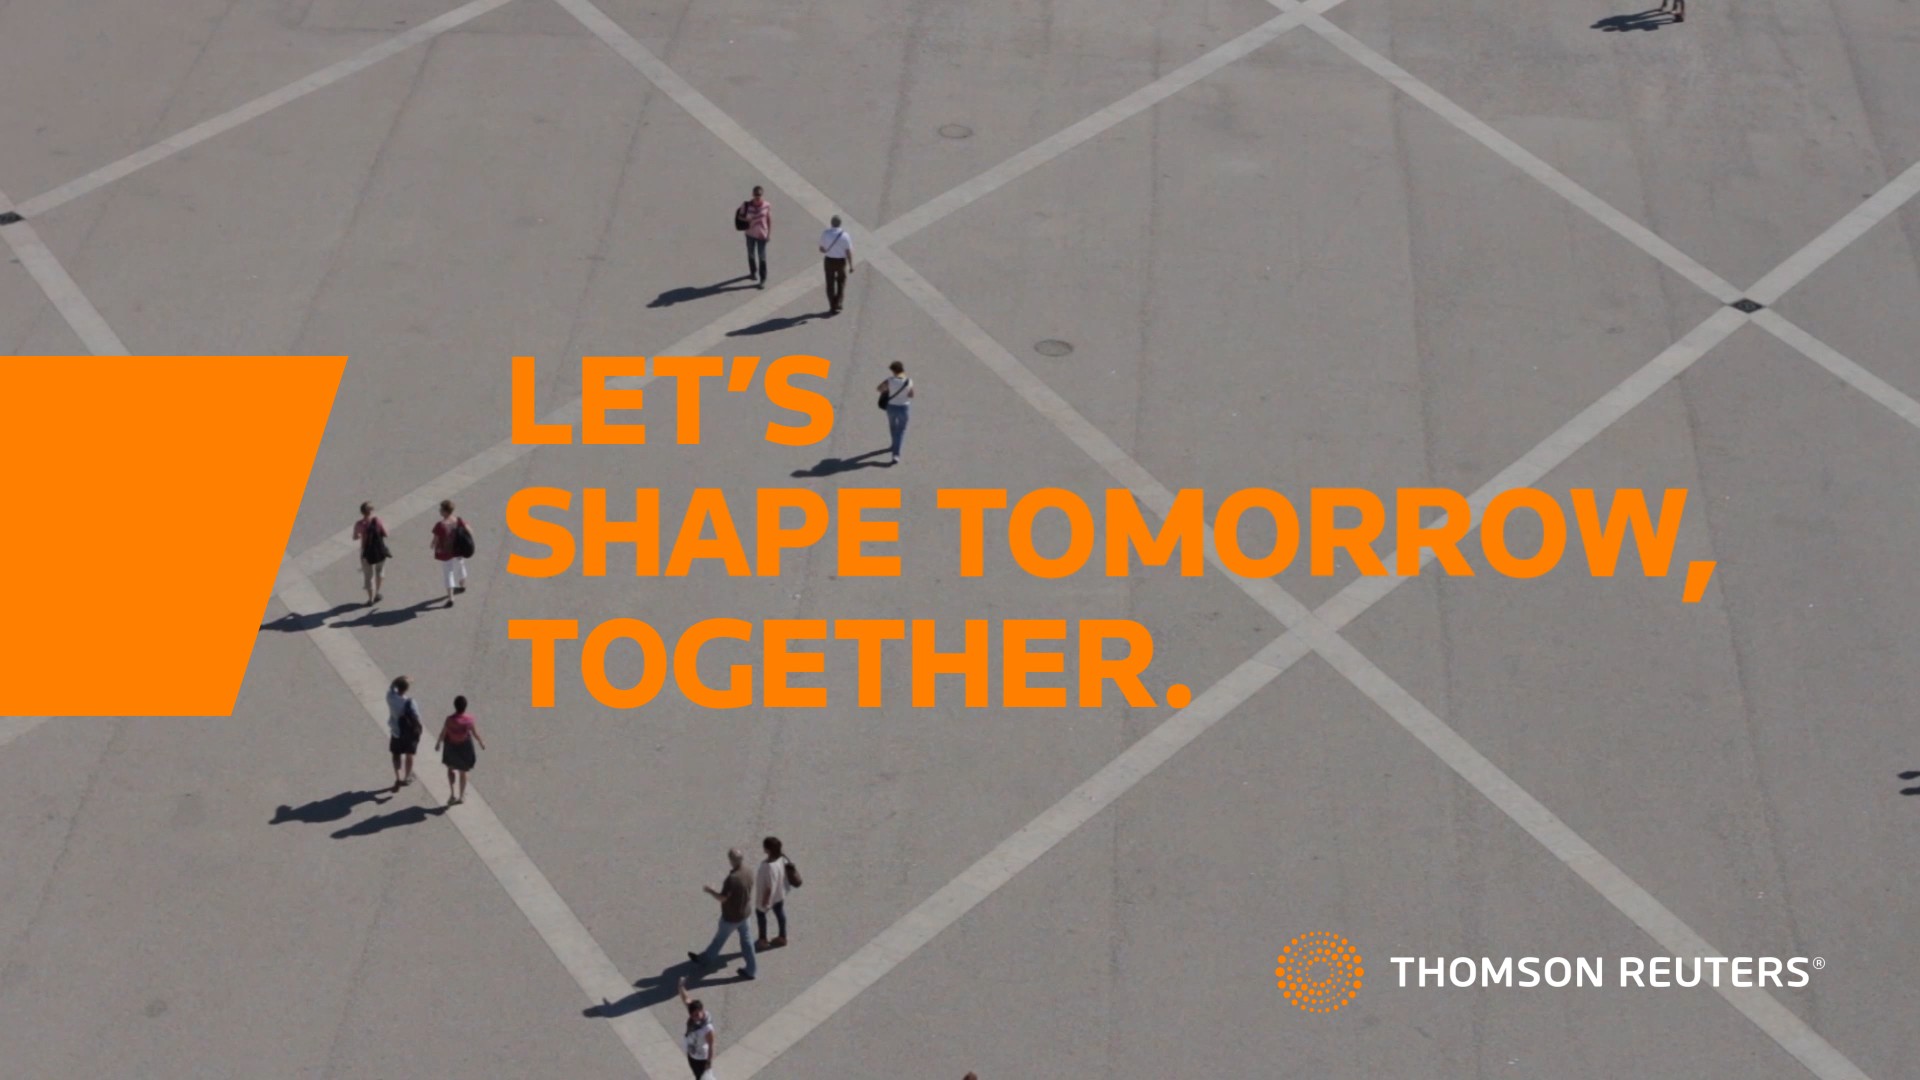 Let's shape tomorrow, together